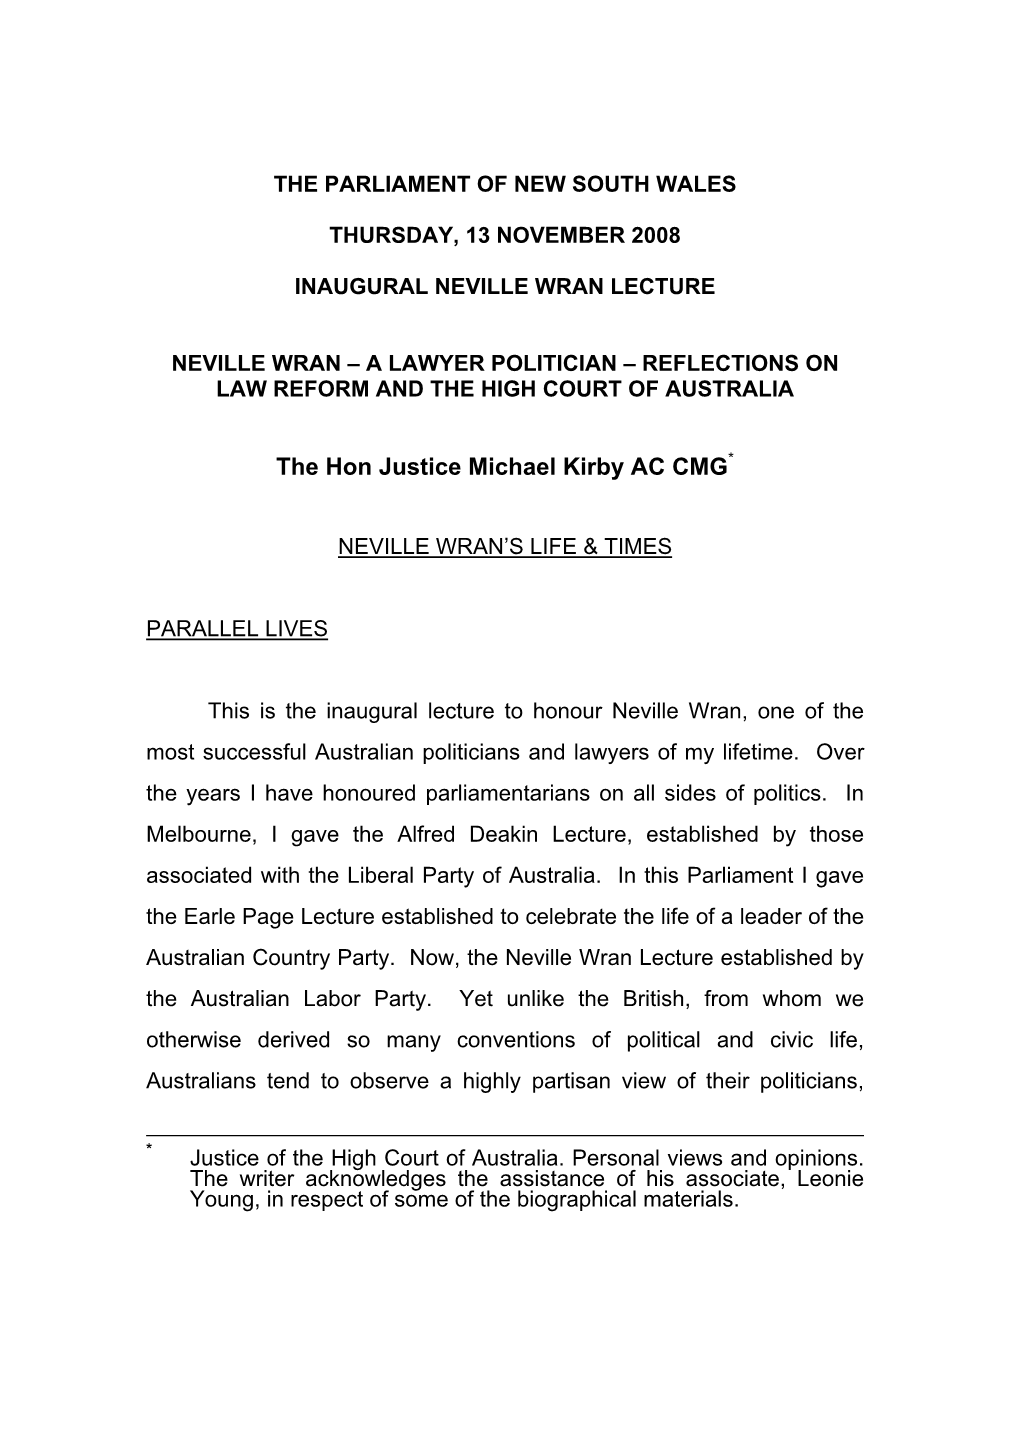 Neville Wran – a Lawyer Politician – Reflections on Law Reform and the High Court of Australia